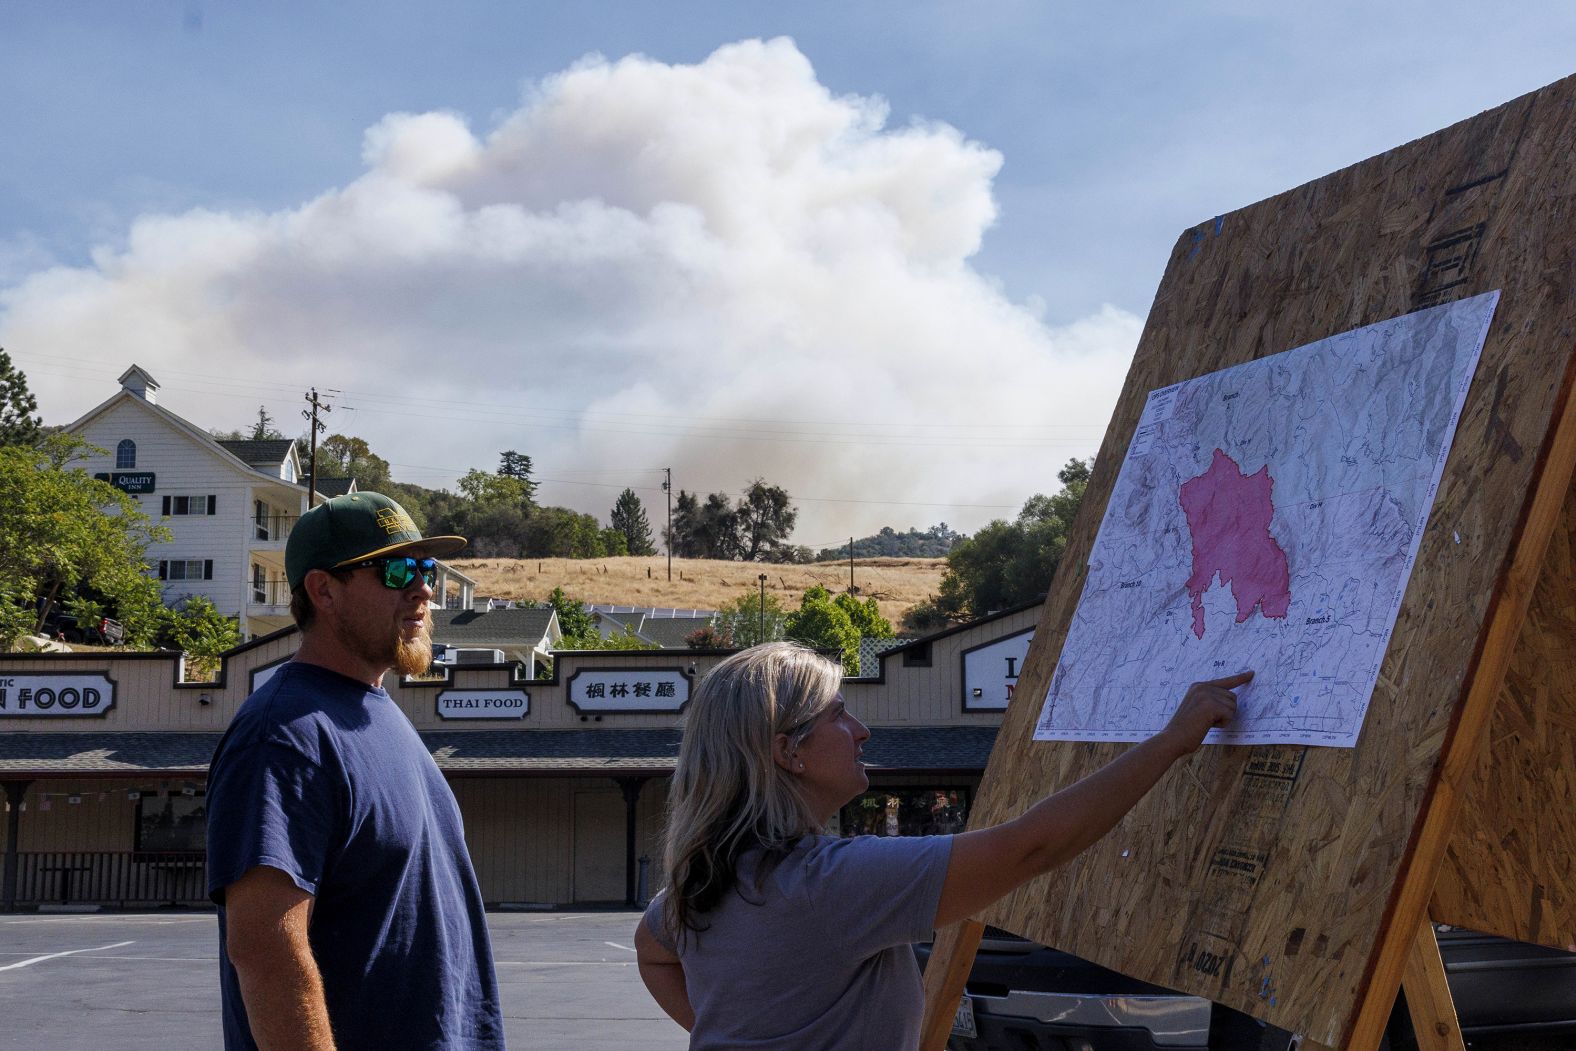 Local residents check a Cal Fire incident map in Mariposa on Saturday.